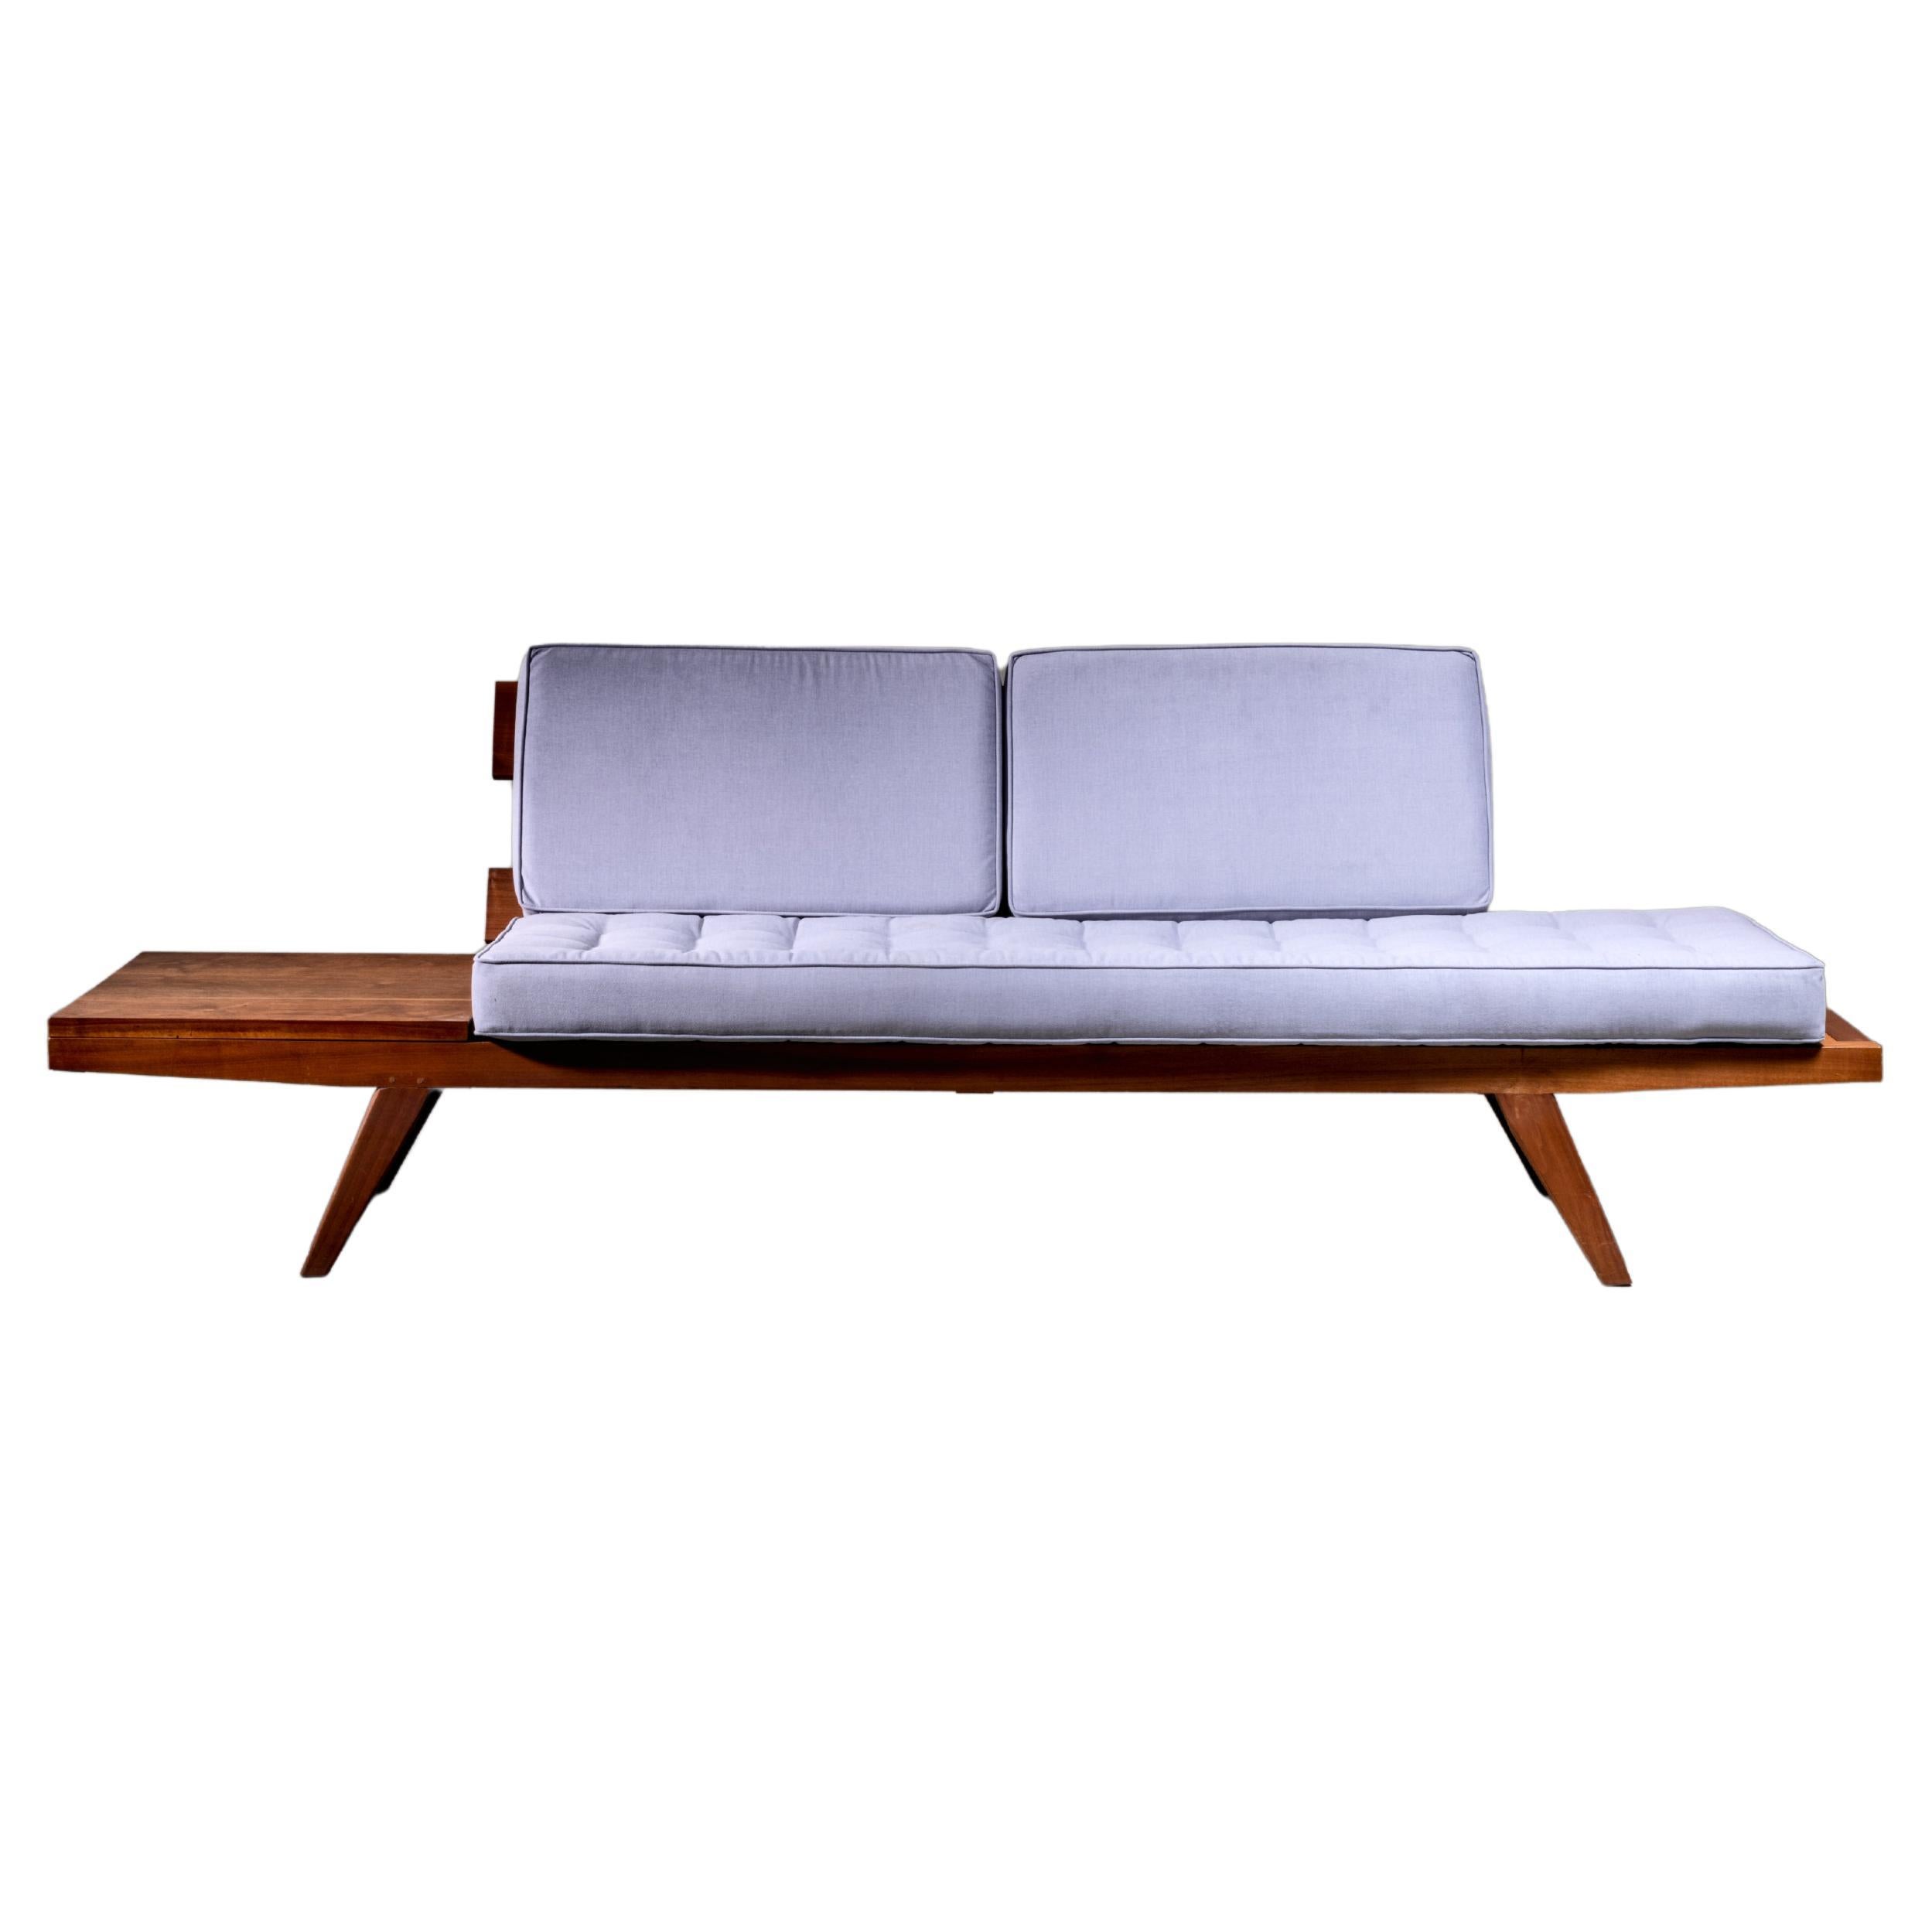 Rude Osolnik Studio Crafted Wooden Sofa, USA, 1960s For Sale